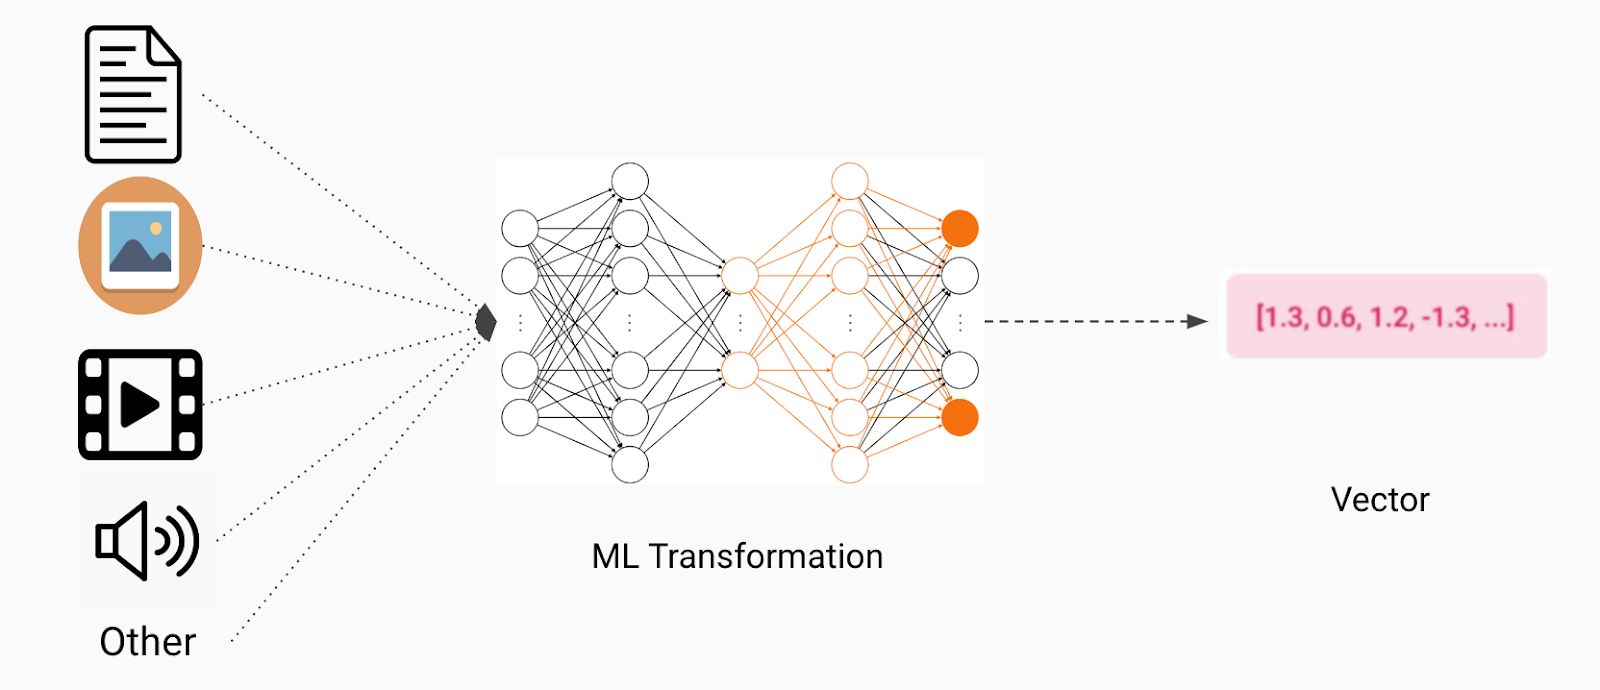 What Is Vector In Machine Learning